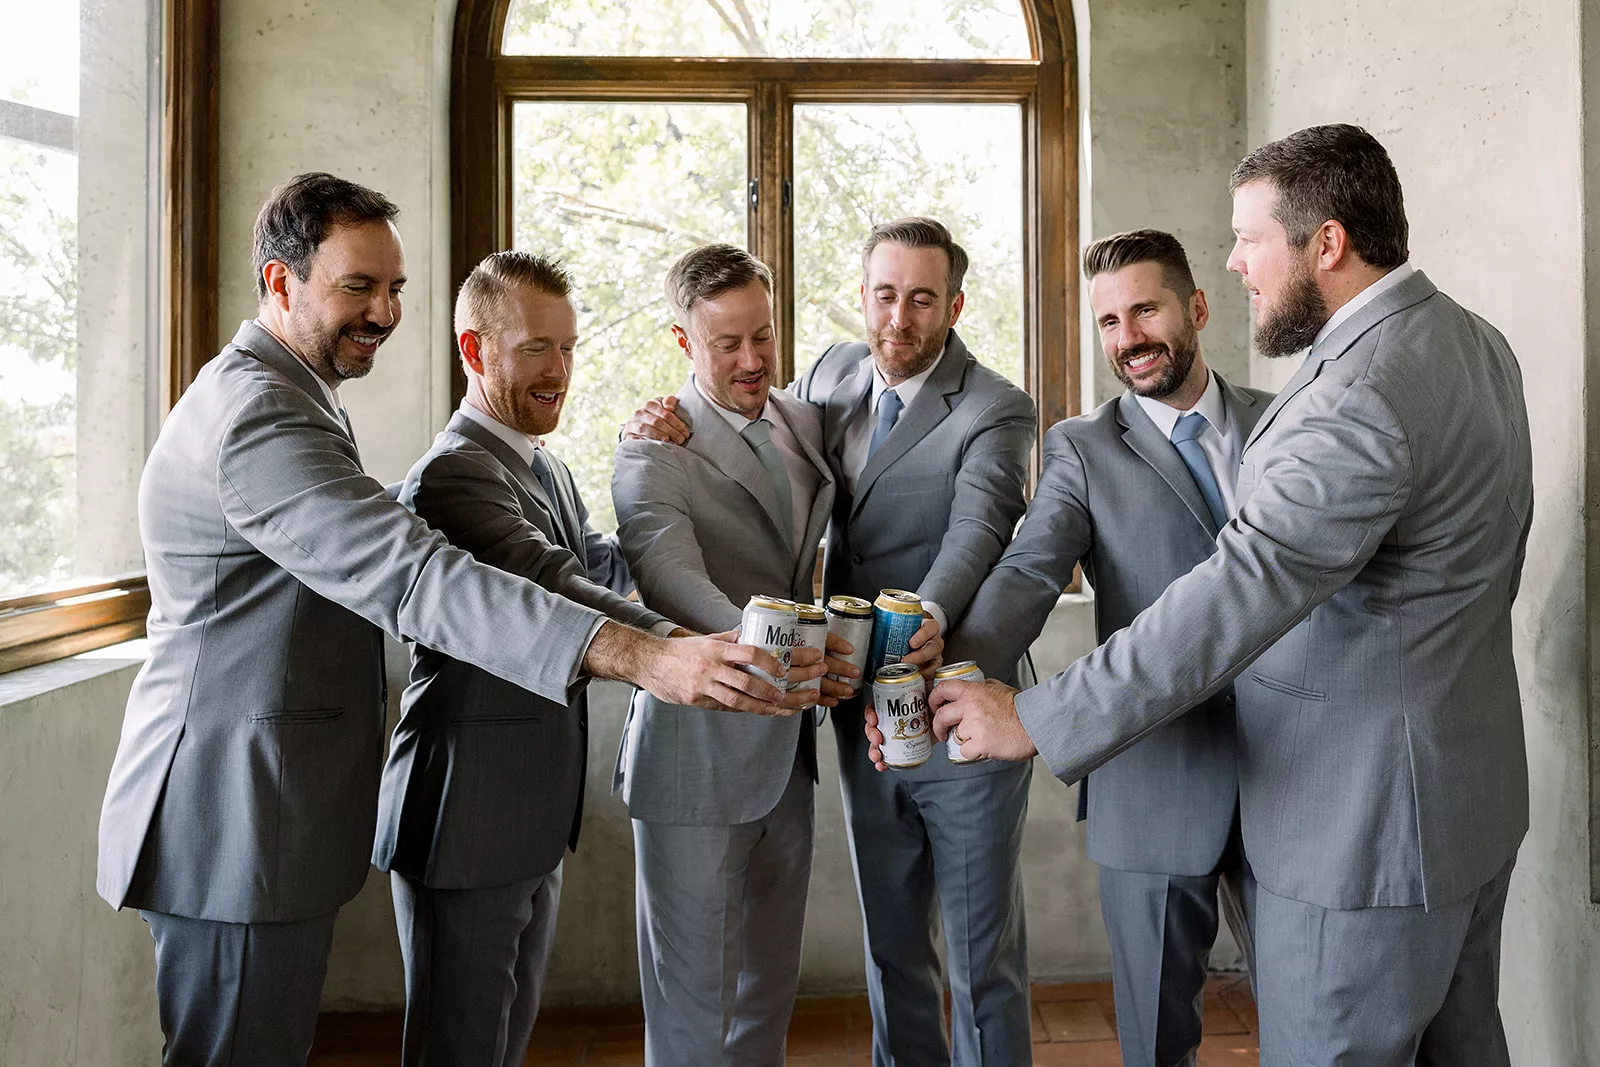 Groomsmen and a groom tap beers together while all wearing grey suits